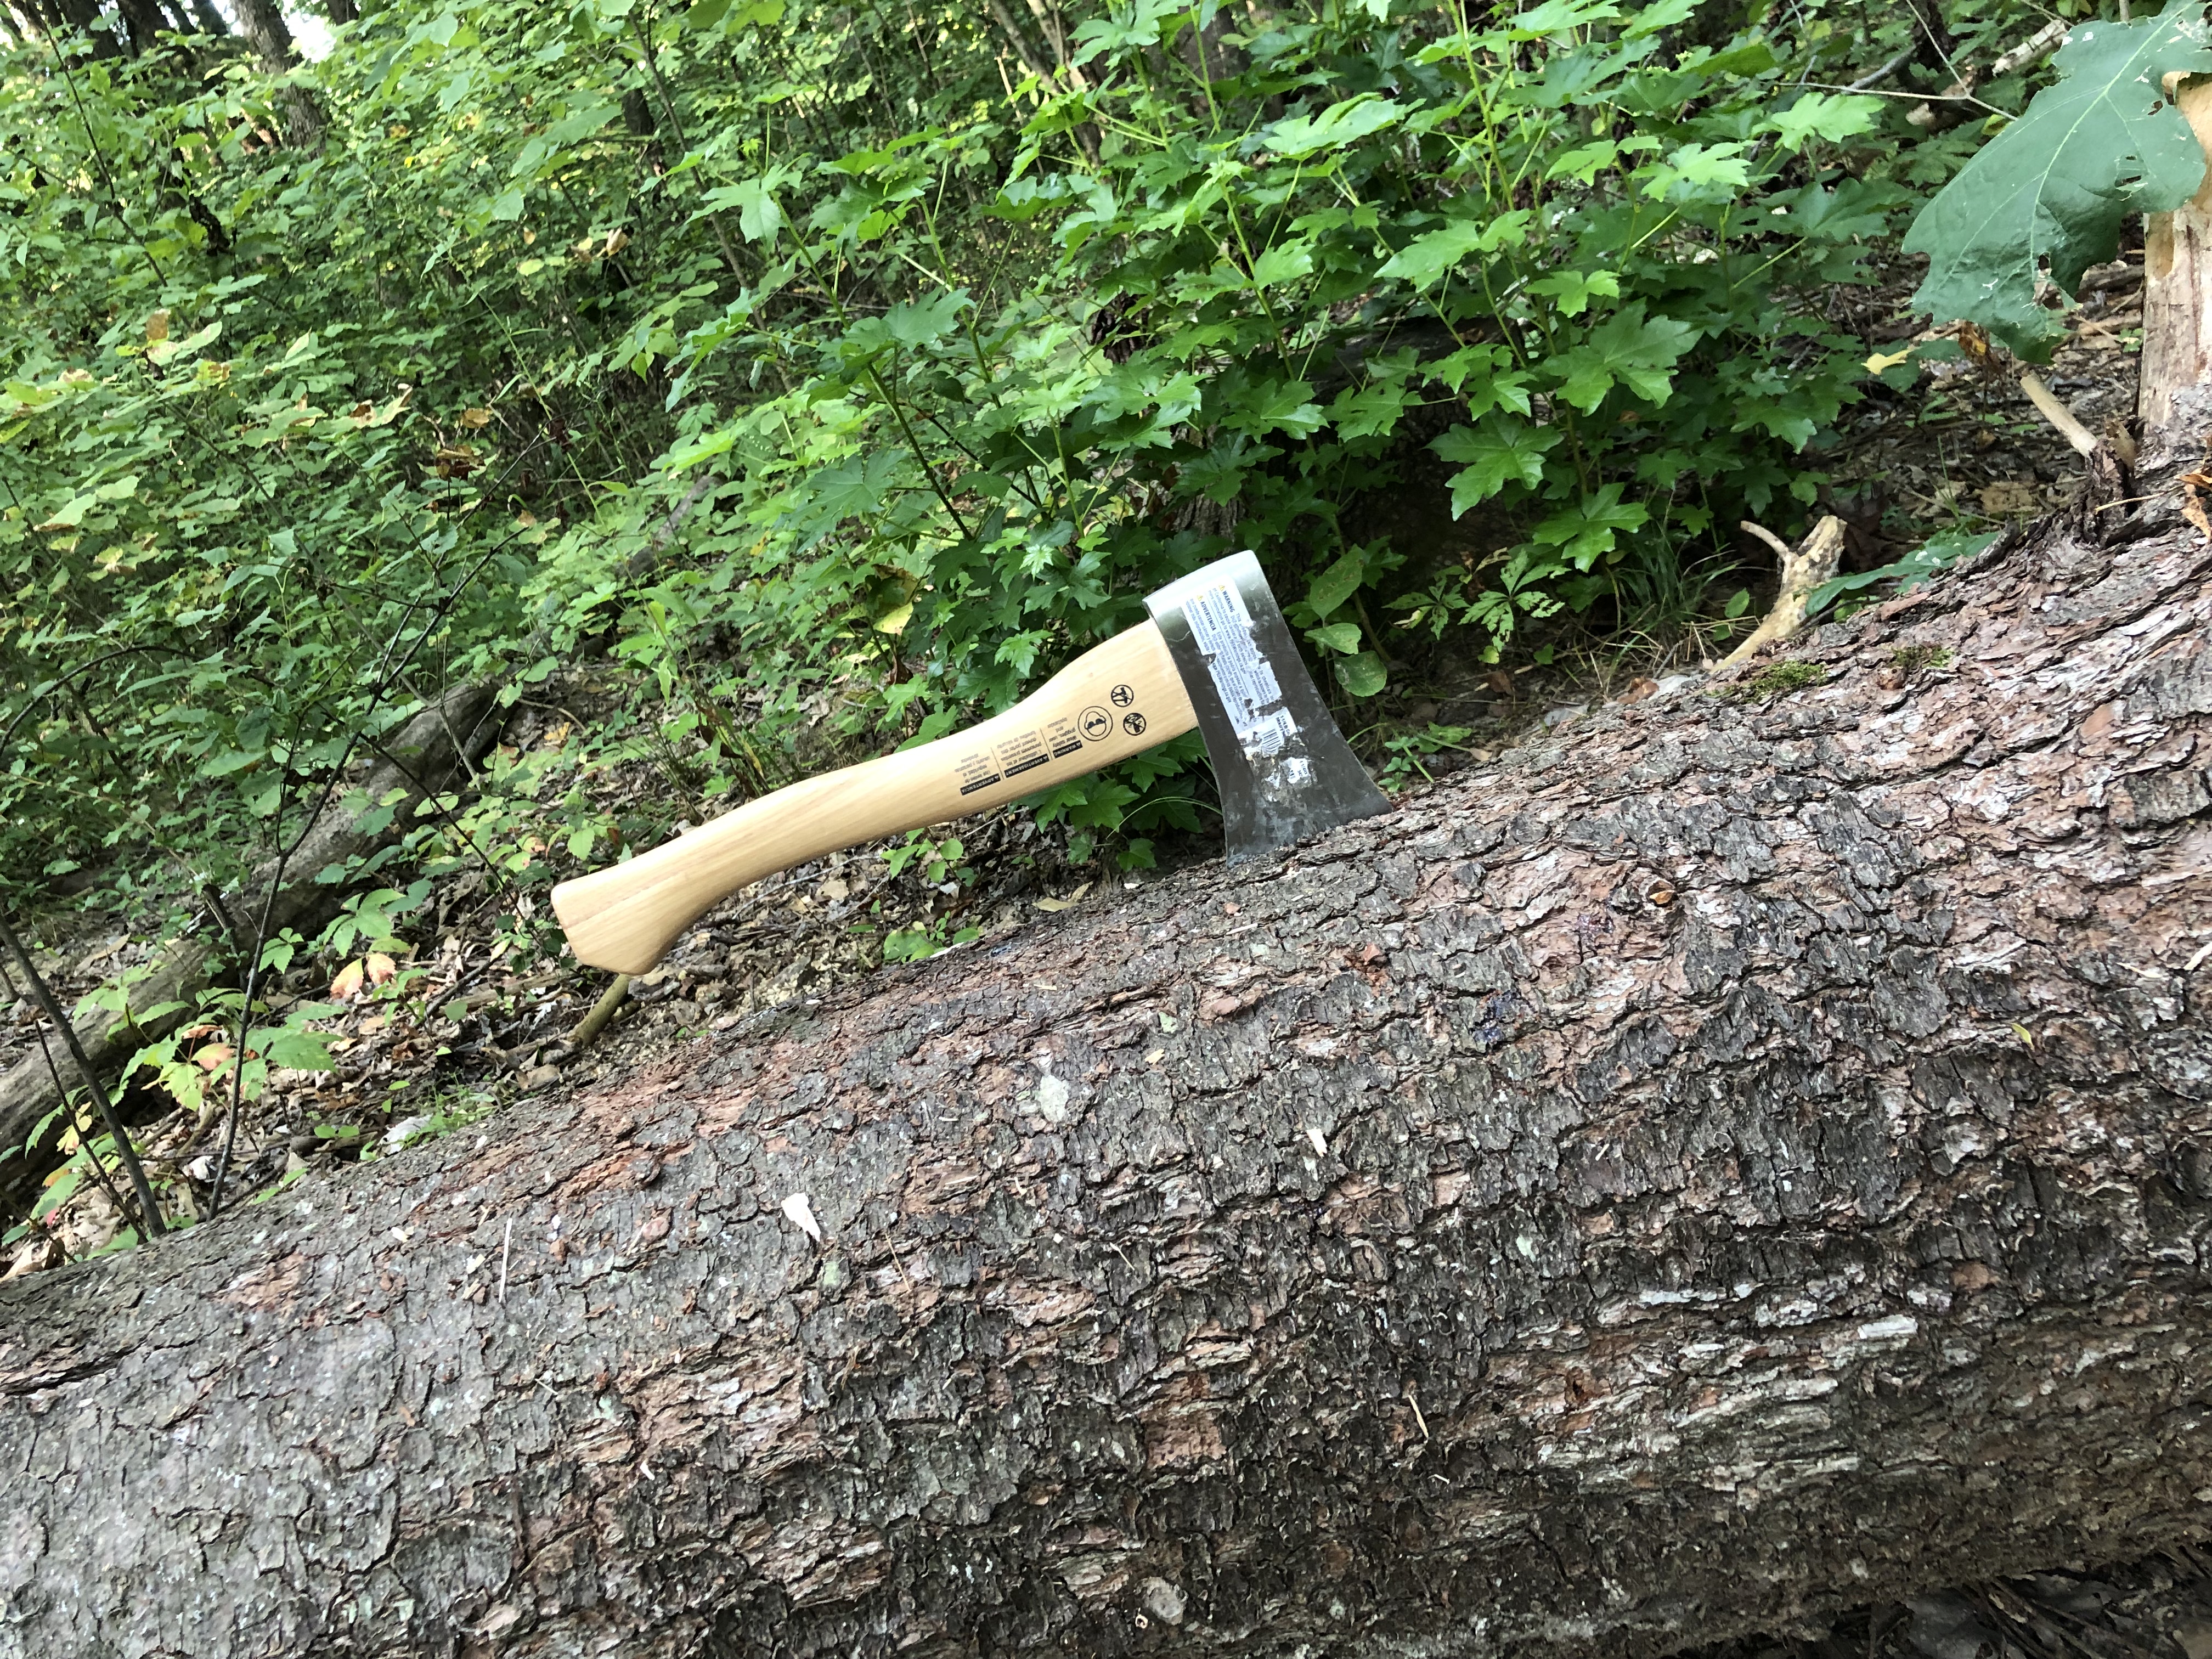 How to handle a hatchet in a tree